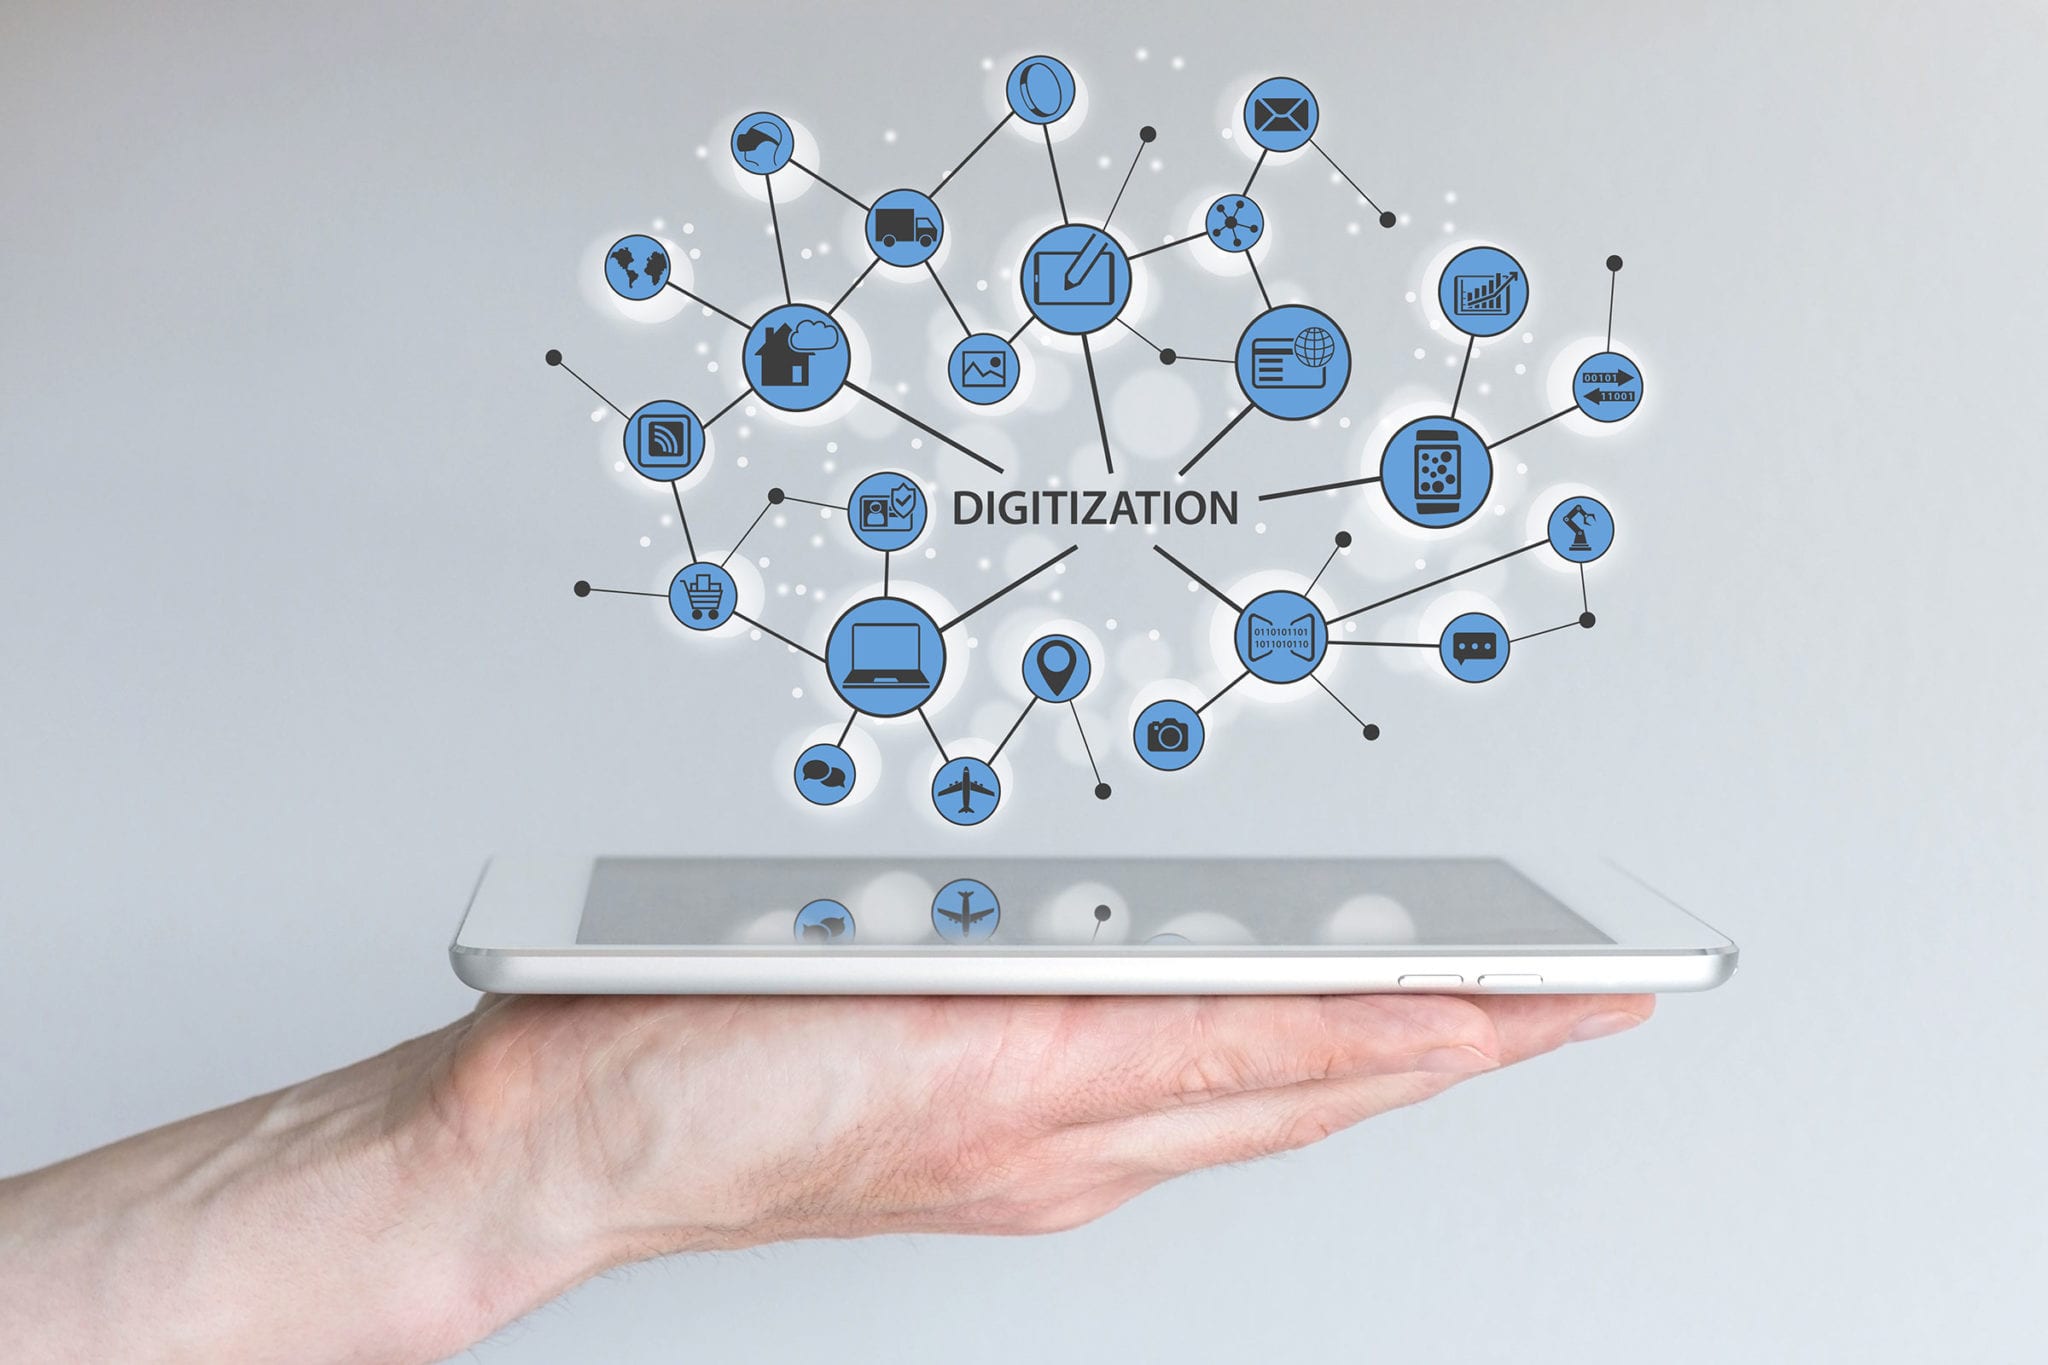 Why Are So Many Companies Behind on Digitization? - Tweak Your Biz